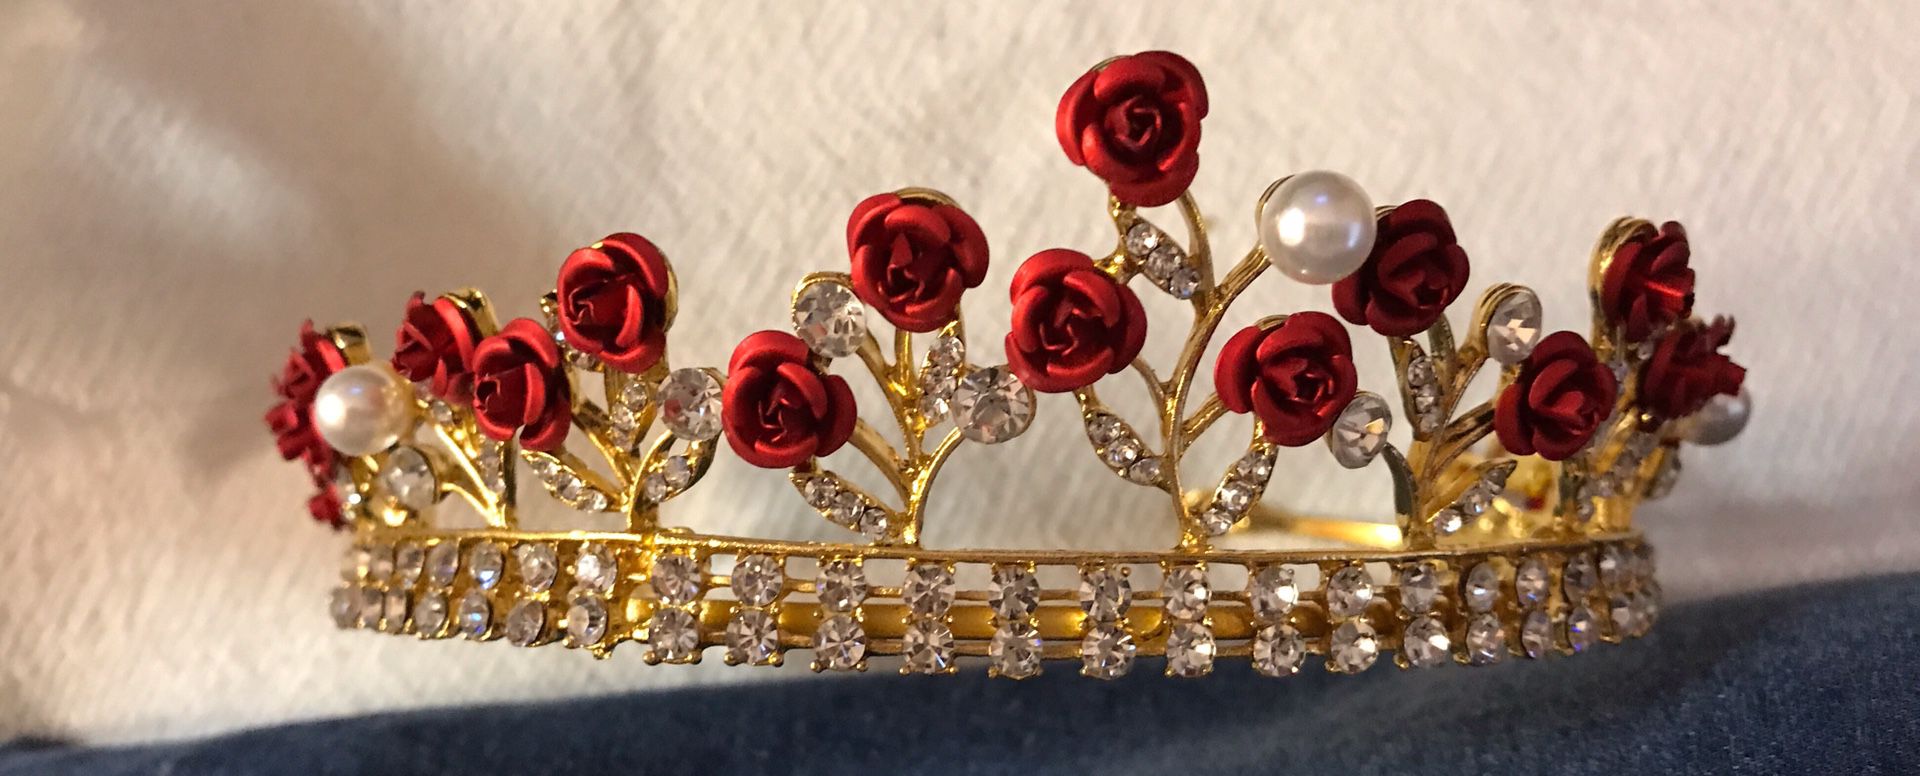 Wedding or Quinceanera Tiara with Red Roses